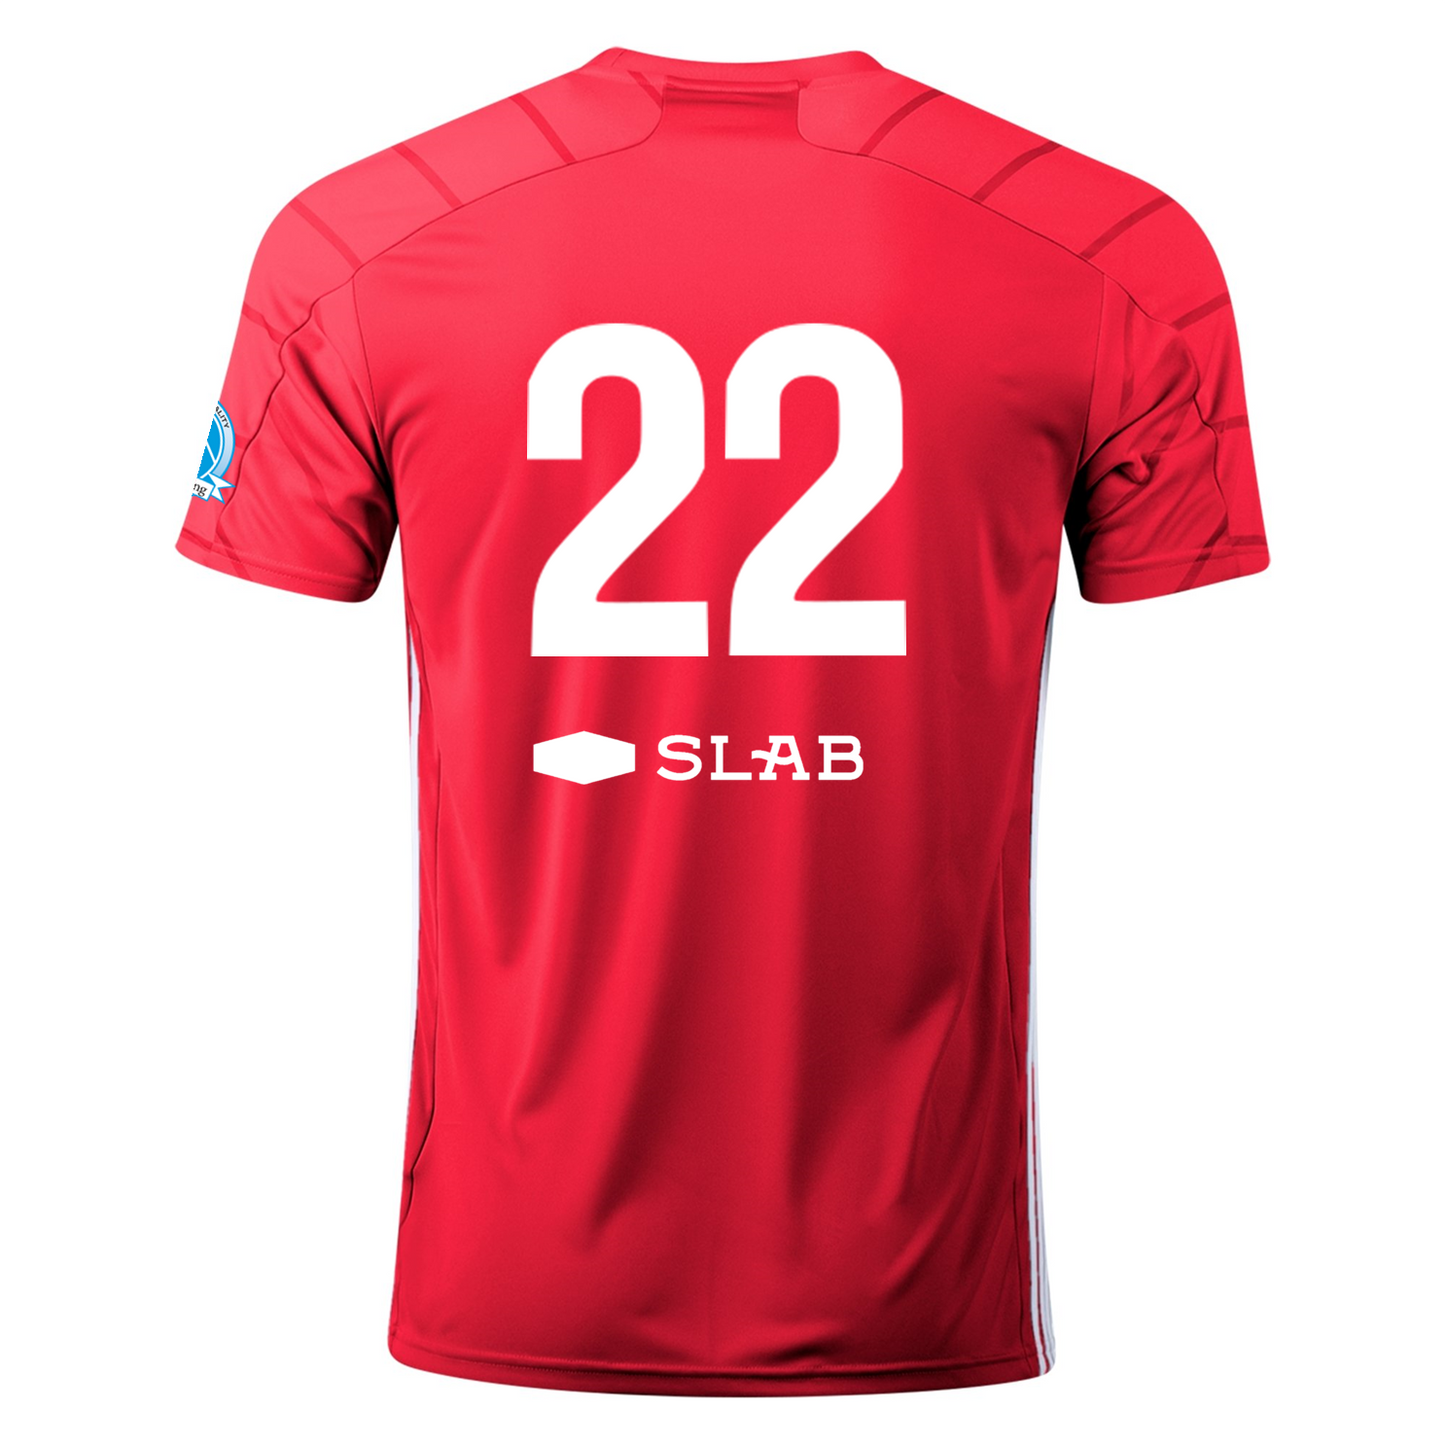 Capital FC '22 Jersey [Youth]